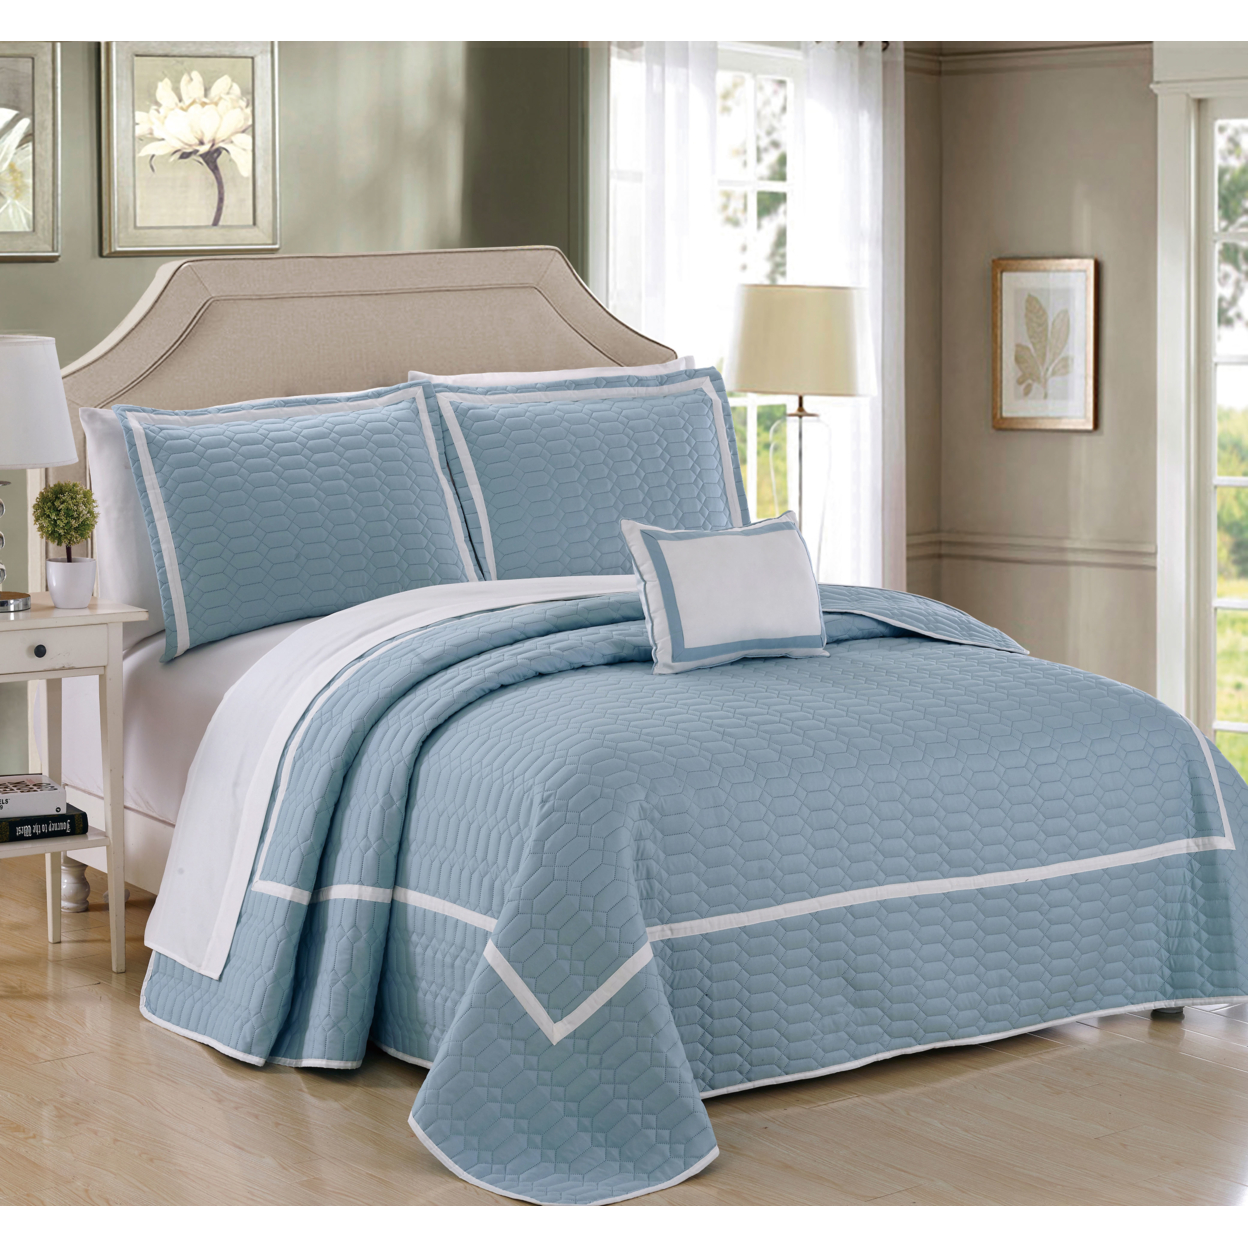 8 Pc. Neal Hotel Collection 2 Tone Banded Geometrical Embroidered, Quilt In A Bag, Includes Sheets Set, Shams & Decorative Pillows - Blue, K